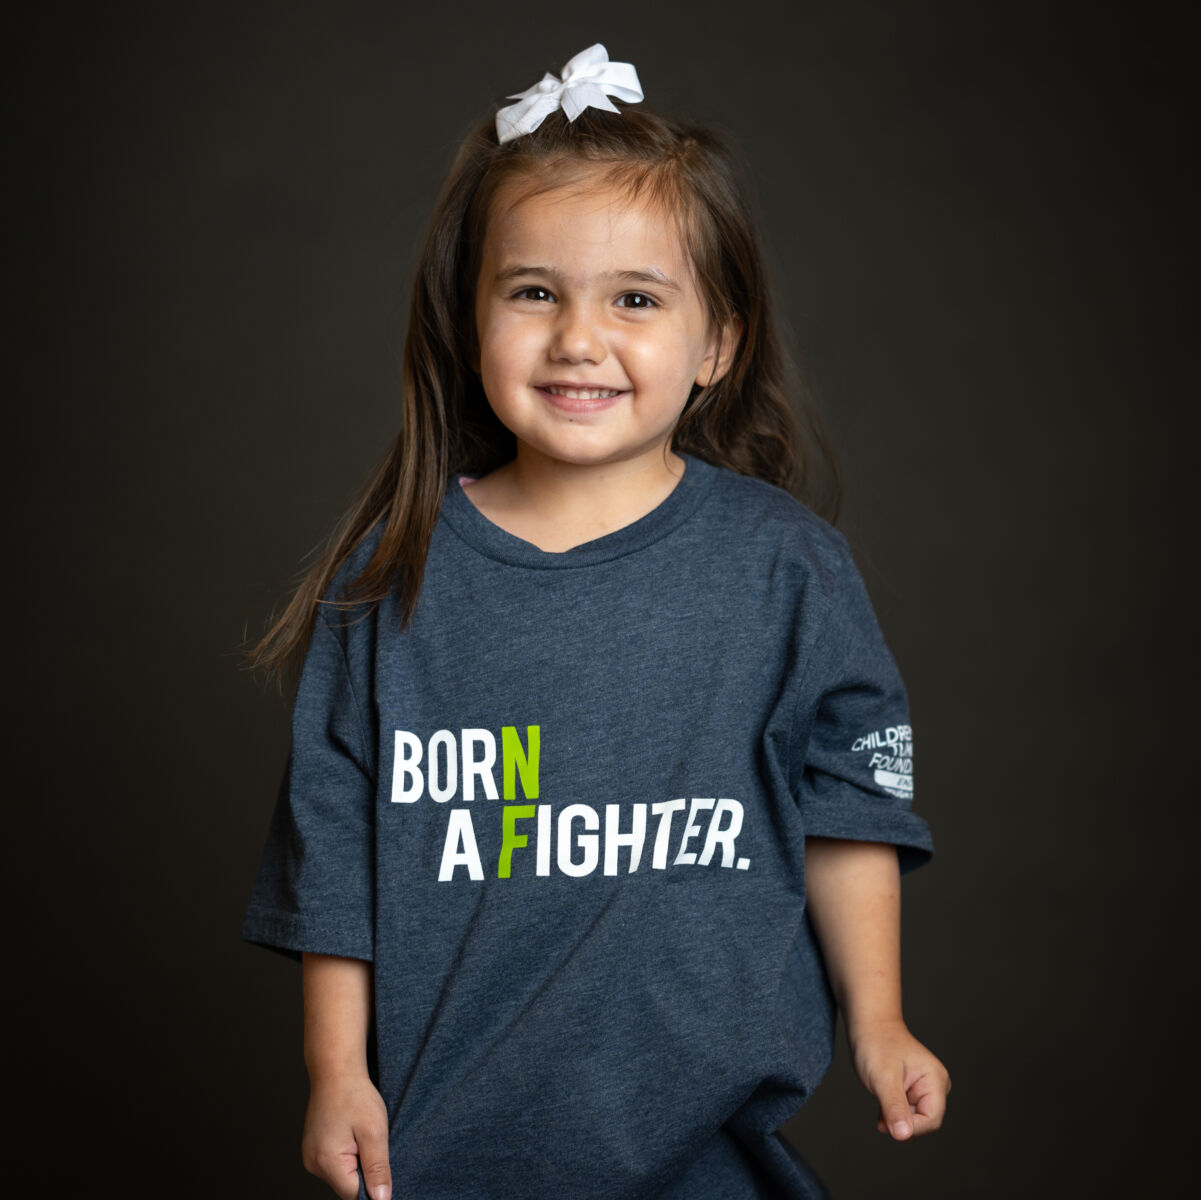 Young girl smiling, wearing a gray t-shirt with "born a fighter." printed on it, standing against a dark background.